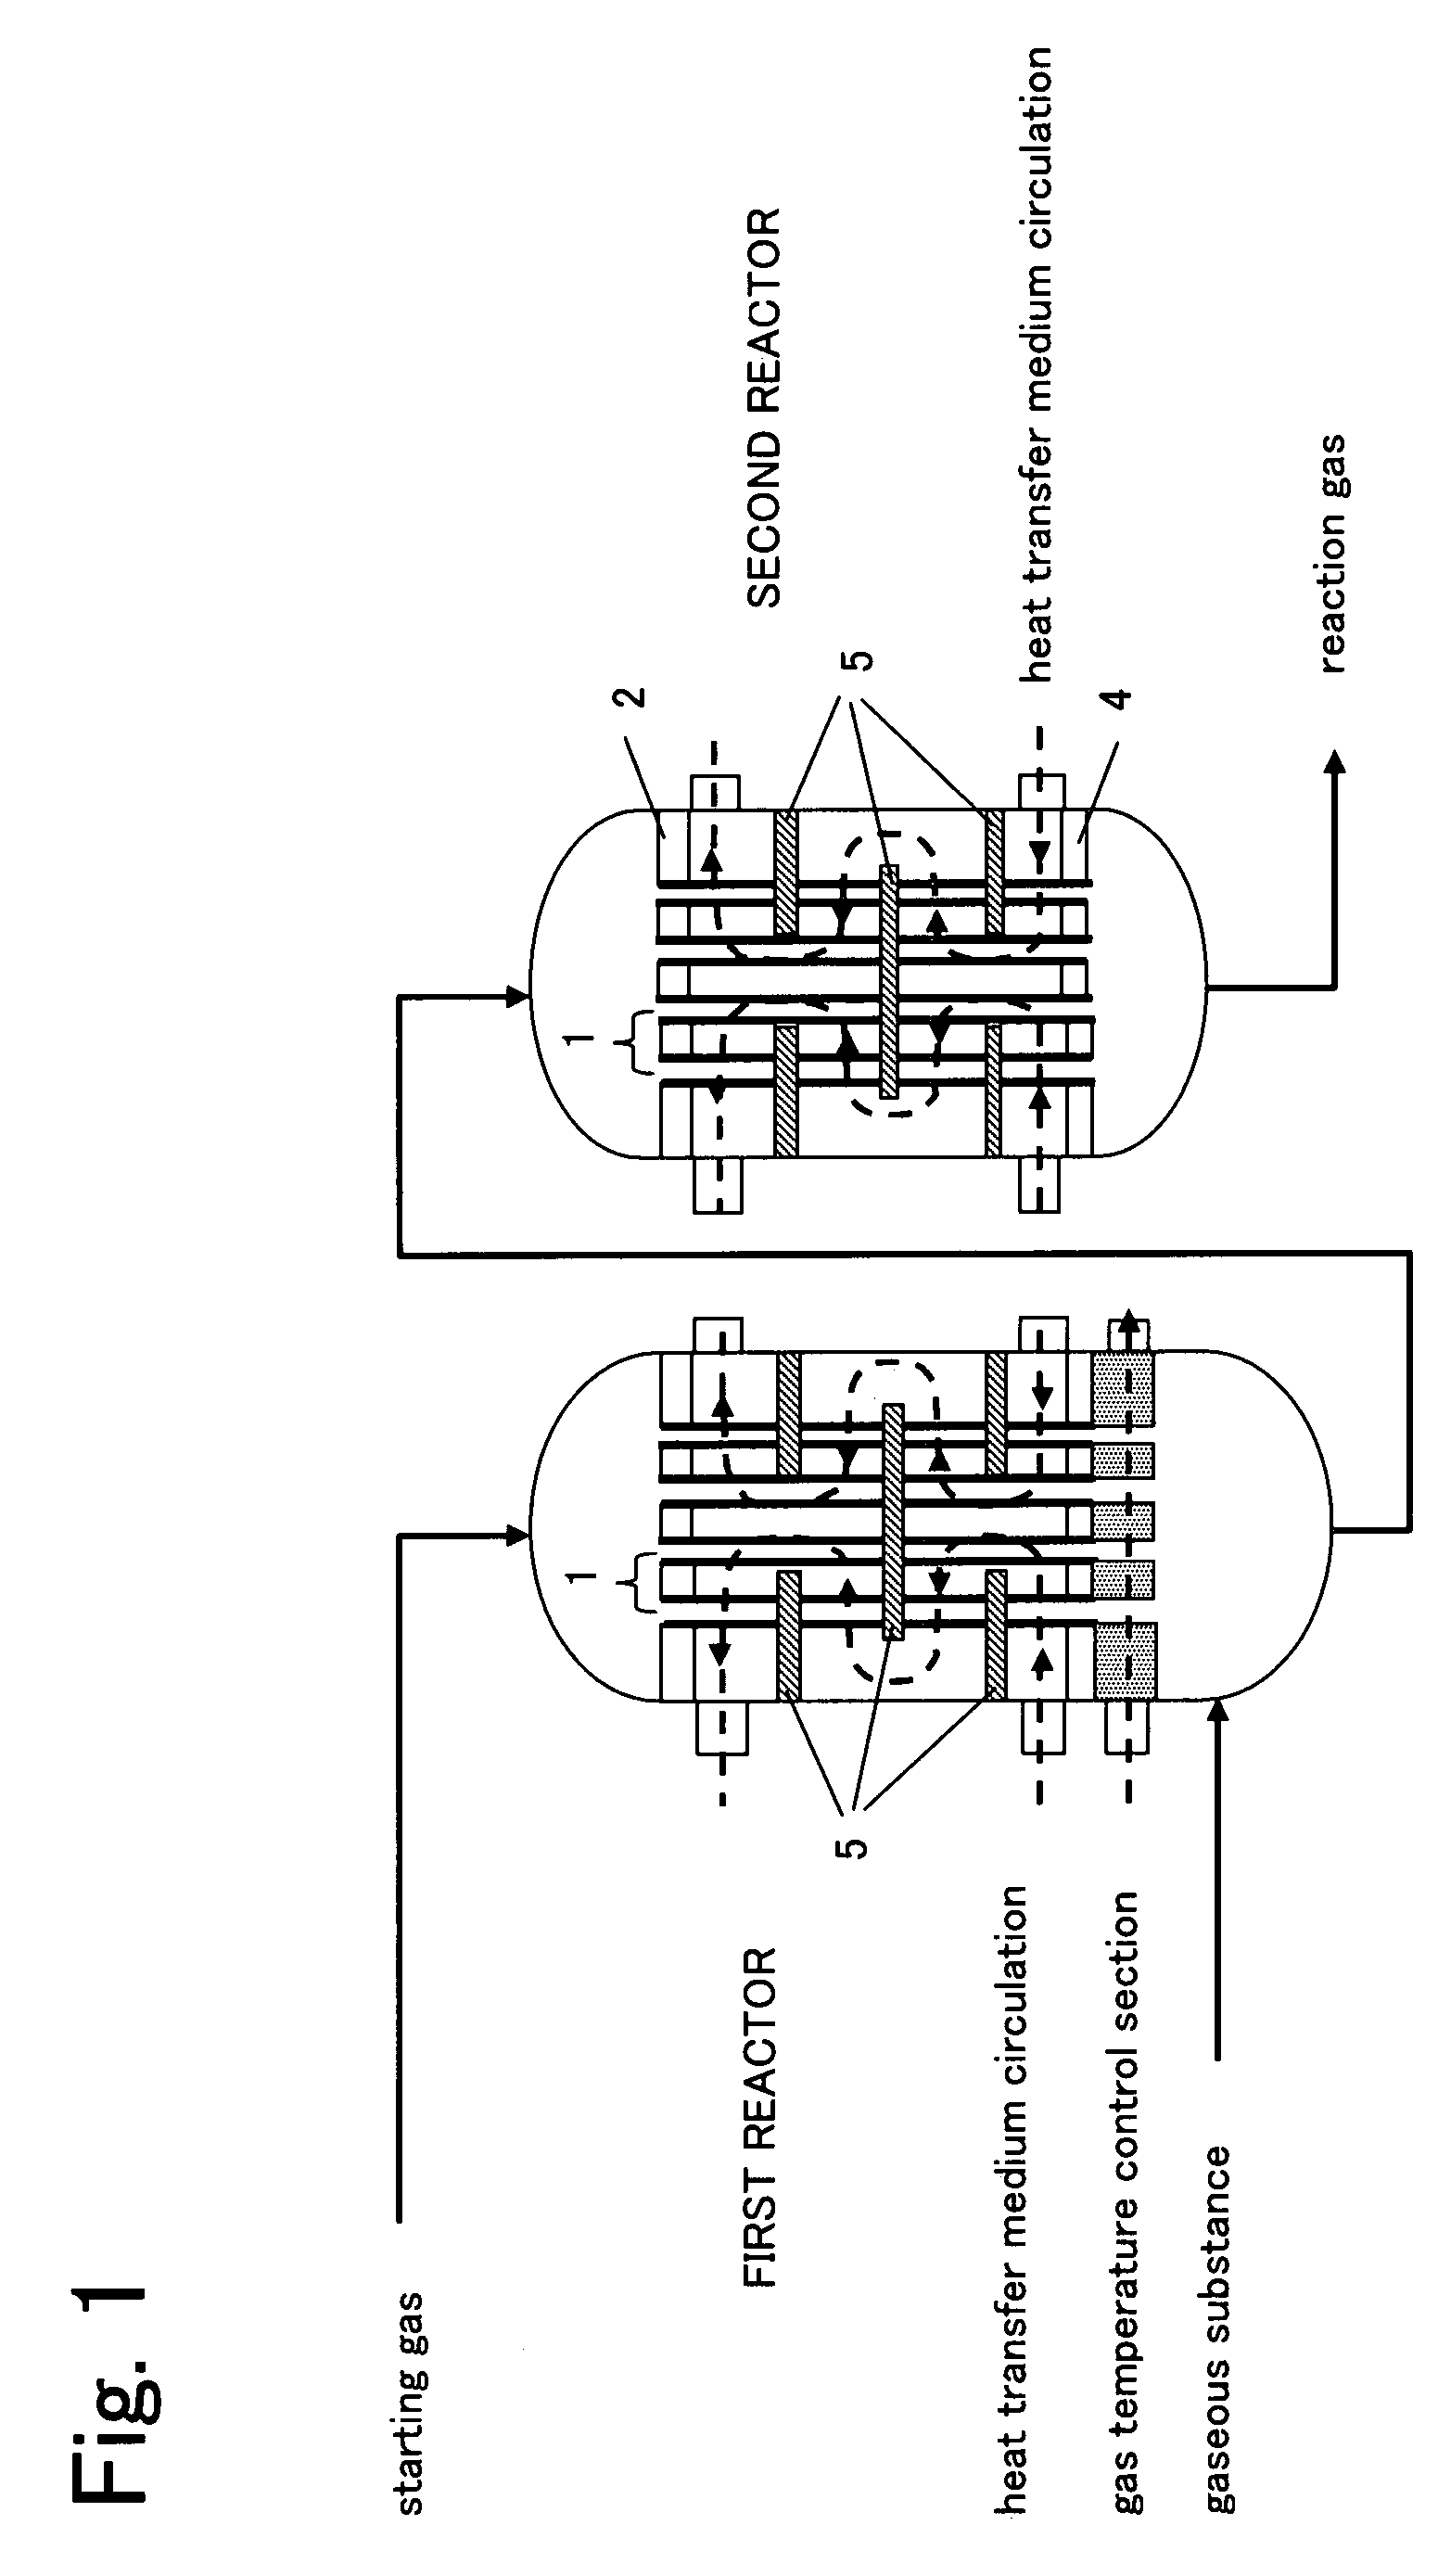 Reactor for gas phase catalytic oxidation and a process for producing acrylic acid using it